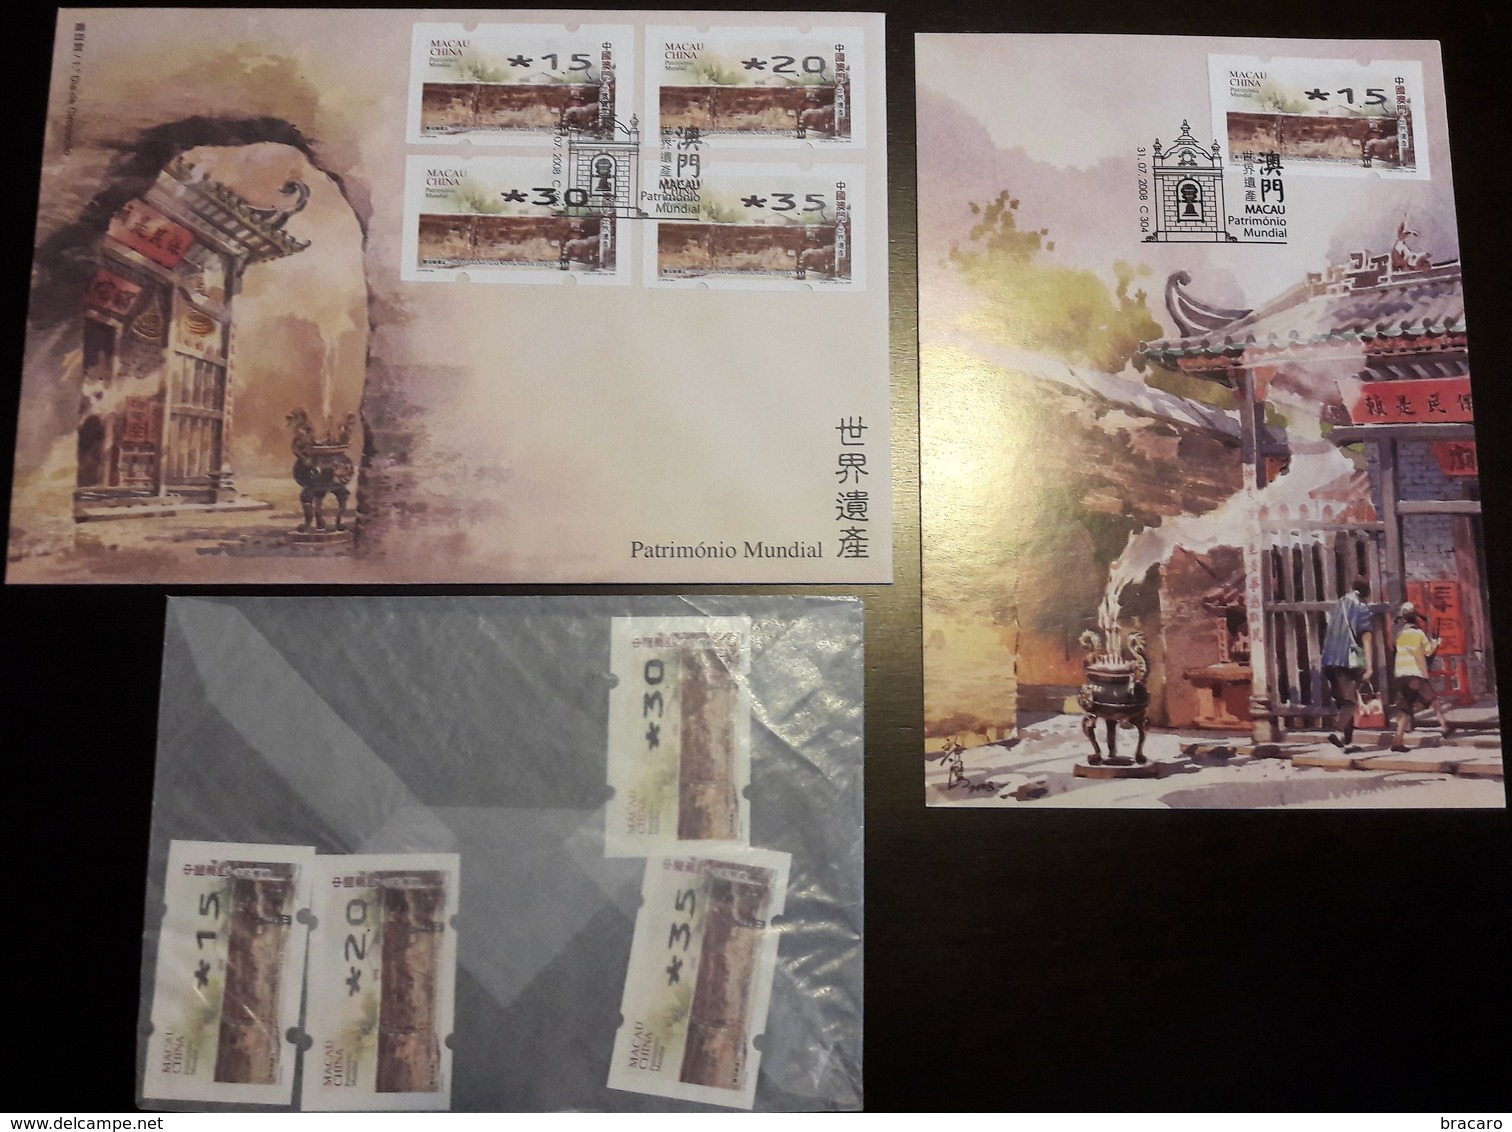 MACAU / MACAO (CHINA) - World Heritage 2008 - Full Set Stamps + FDC + 9 Maximum Cards + Full Set ATM + FDC ATM + Leaflet - Lots & Serien